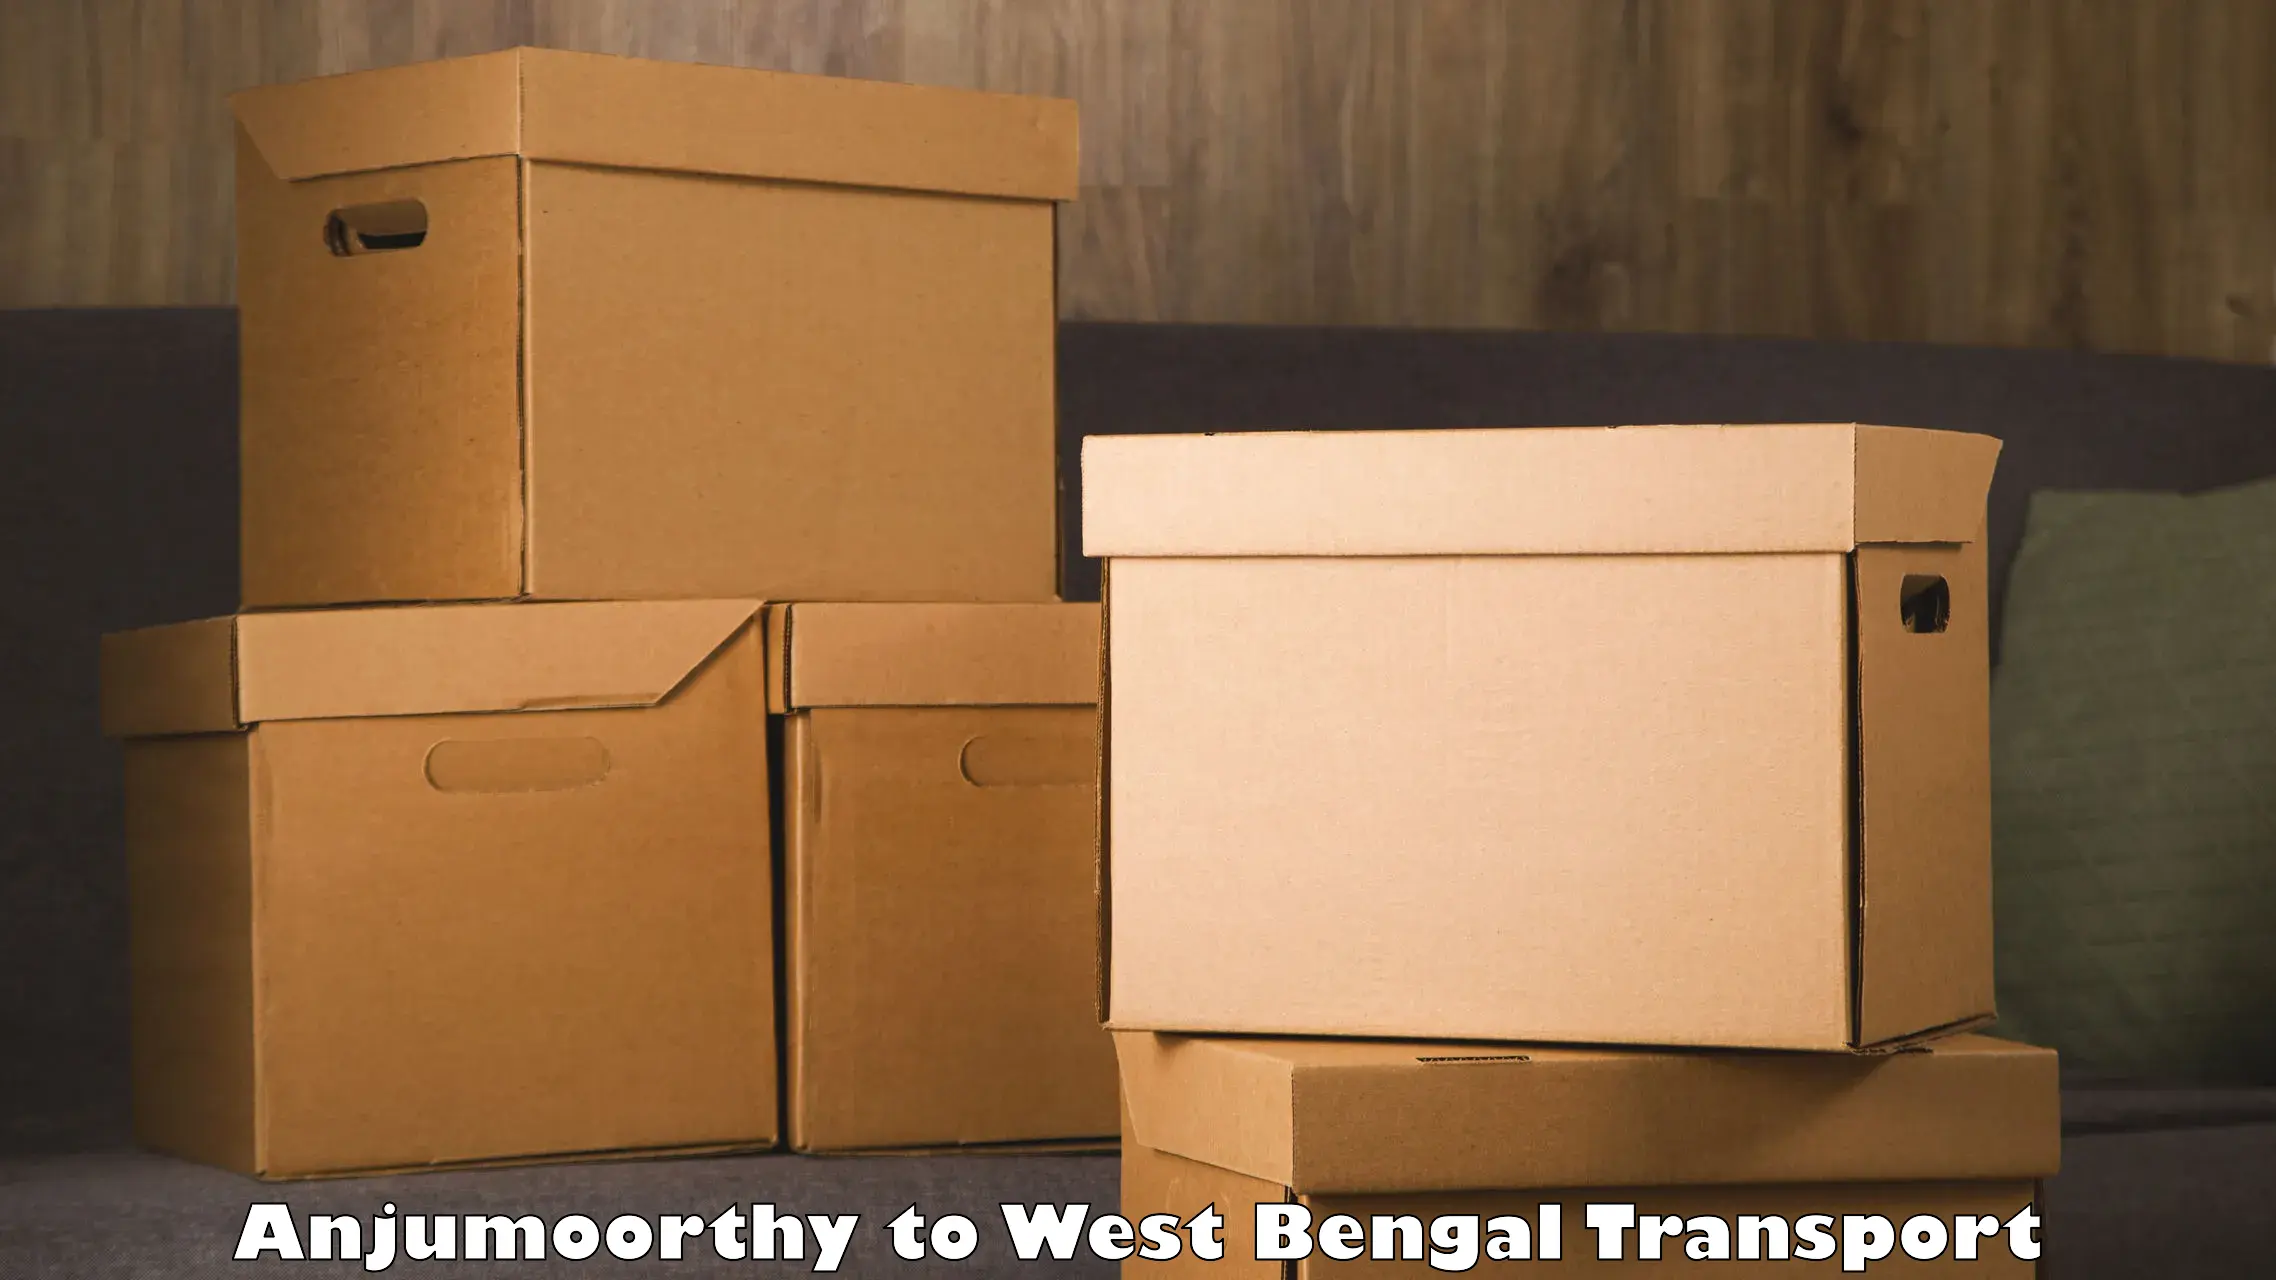 Container transportation services Anjumoorthy to Barrackpore